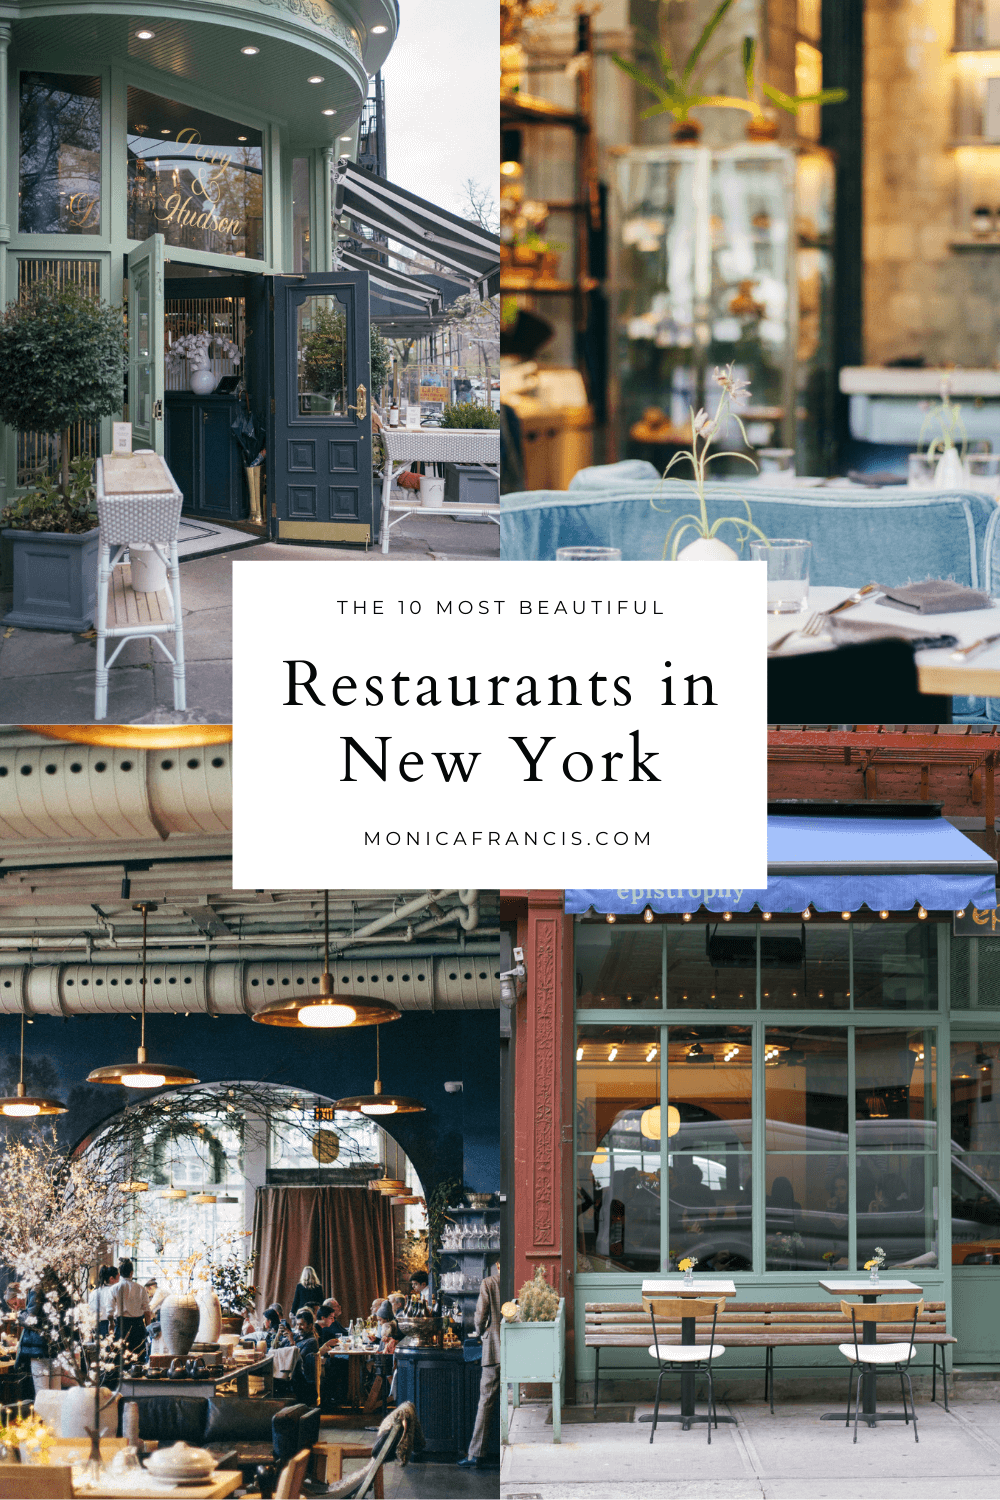 As a local New Yorker, these are the top ten best NYC restaurants that I go back to again and again. From outdoor dining to a quick lunch or leisurely afternoon tea, these are the reliable spots you want to add to your New York City itinerary!